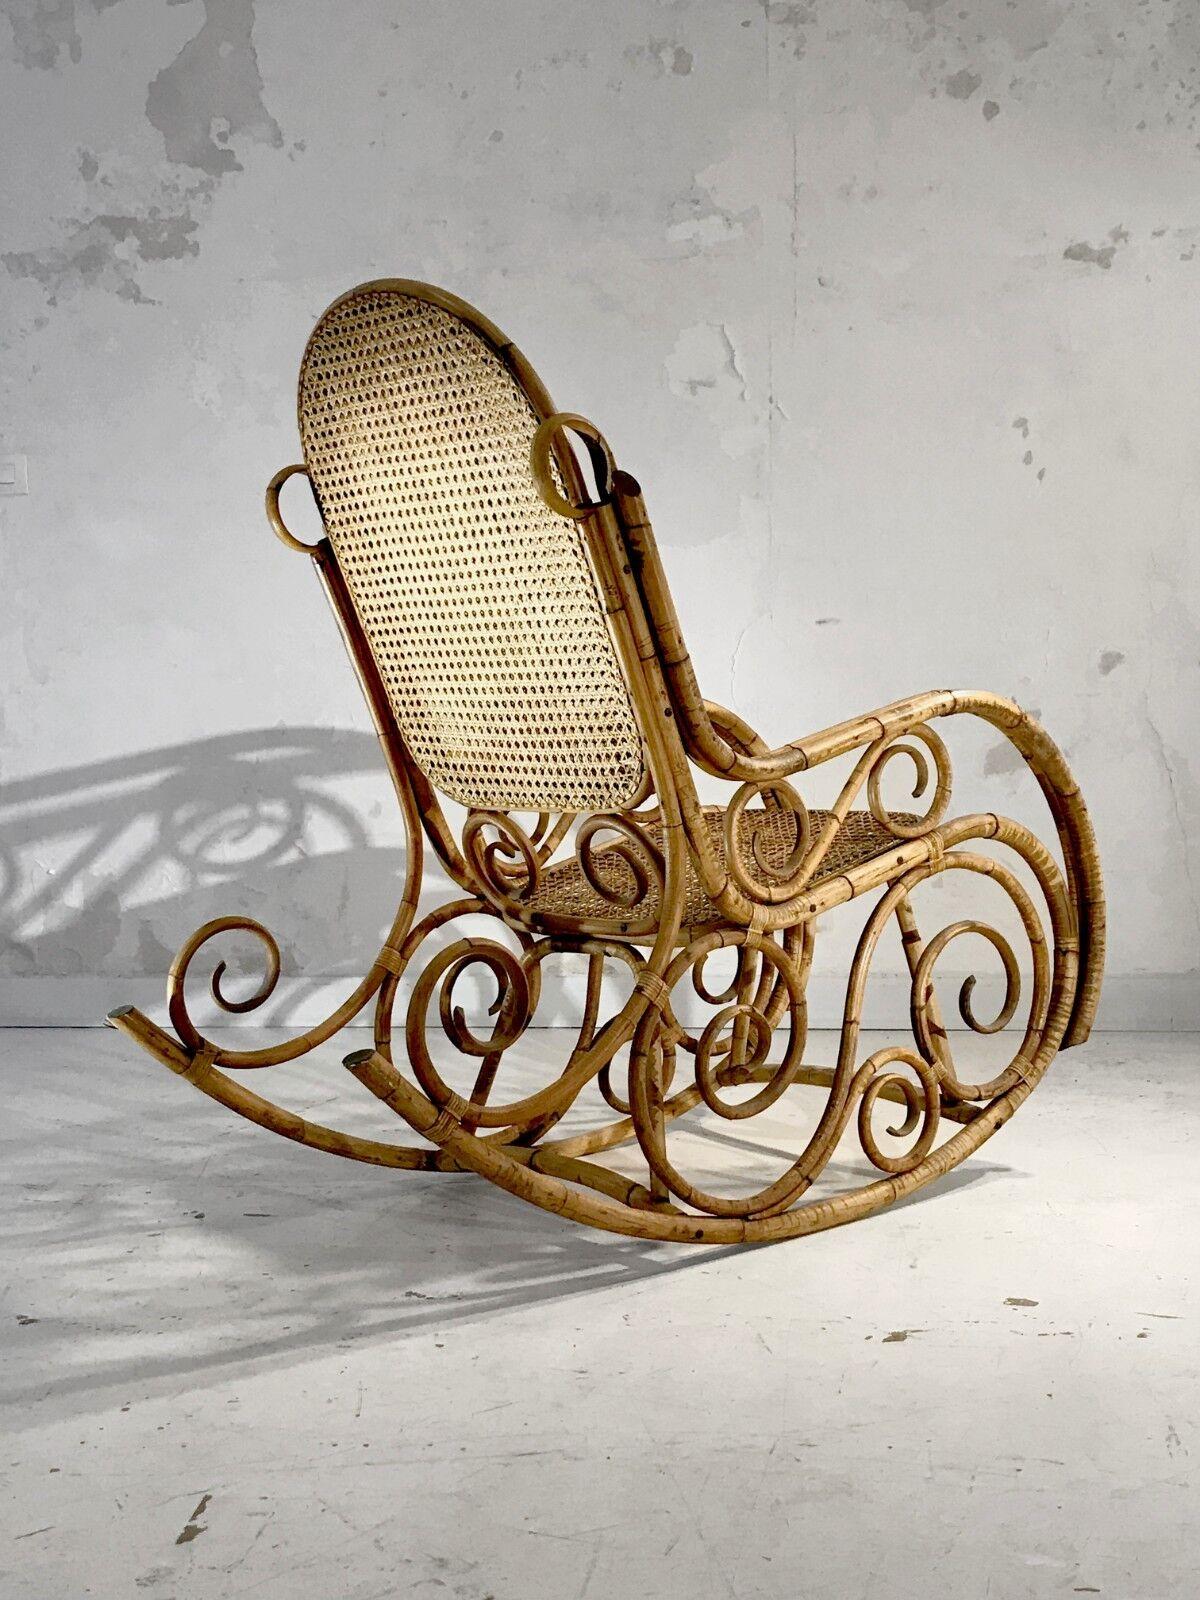 Early 20th Century An Early MODERN NEO-CLASSICAL FREE-FORM ROCKING-CHAIR by THONET, France 1900 For Sale